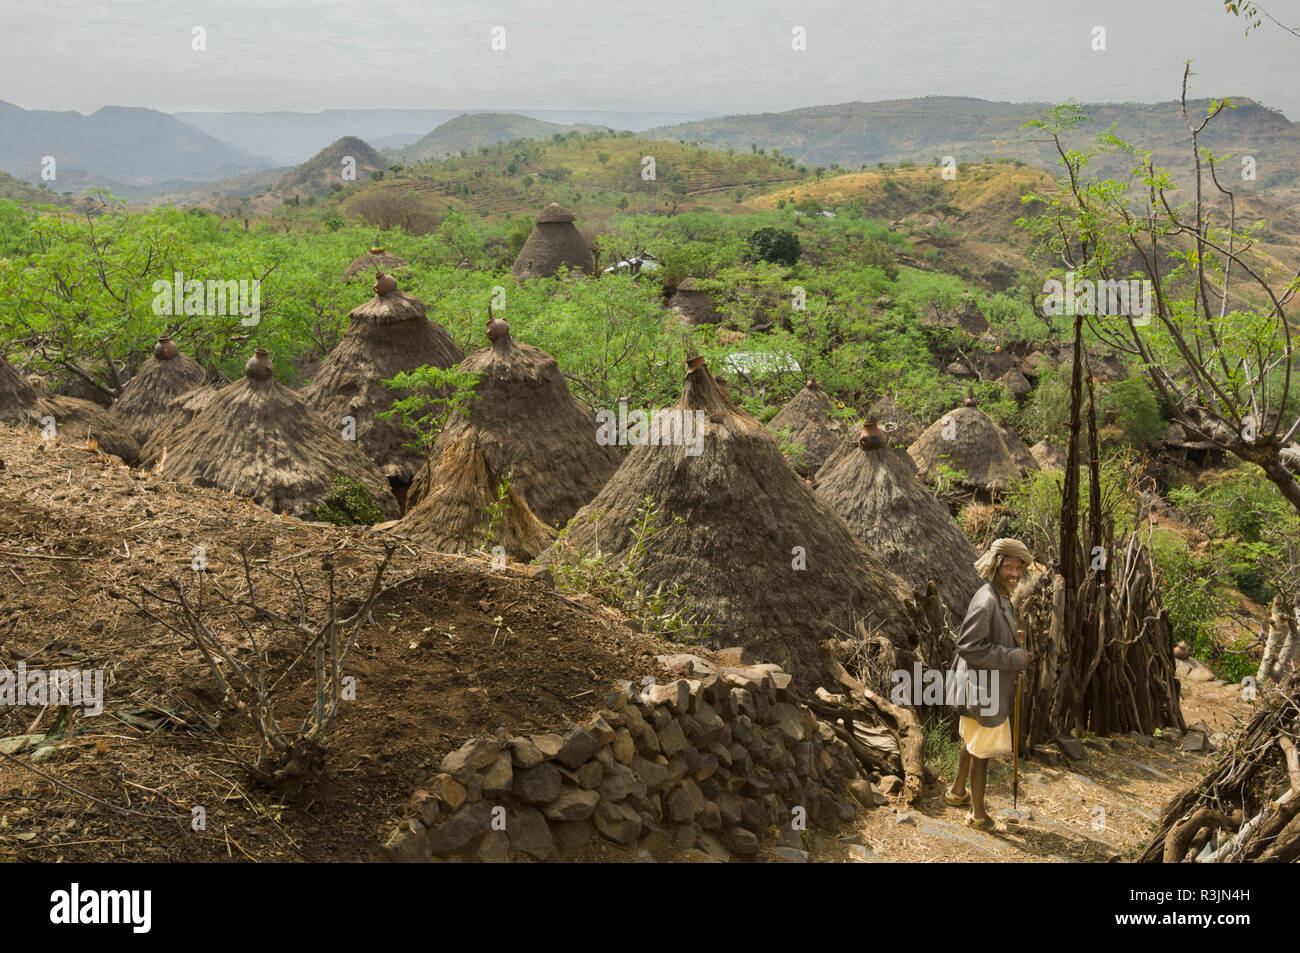 Africa, Ethiopia, Omo region. An old man on a path next to some thatched buildings in the Konso tribe village of Busso. Stock Photo